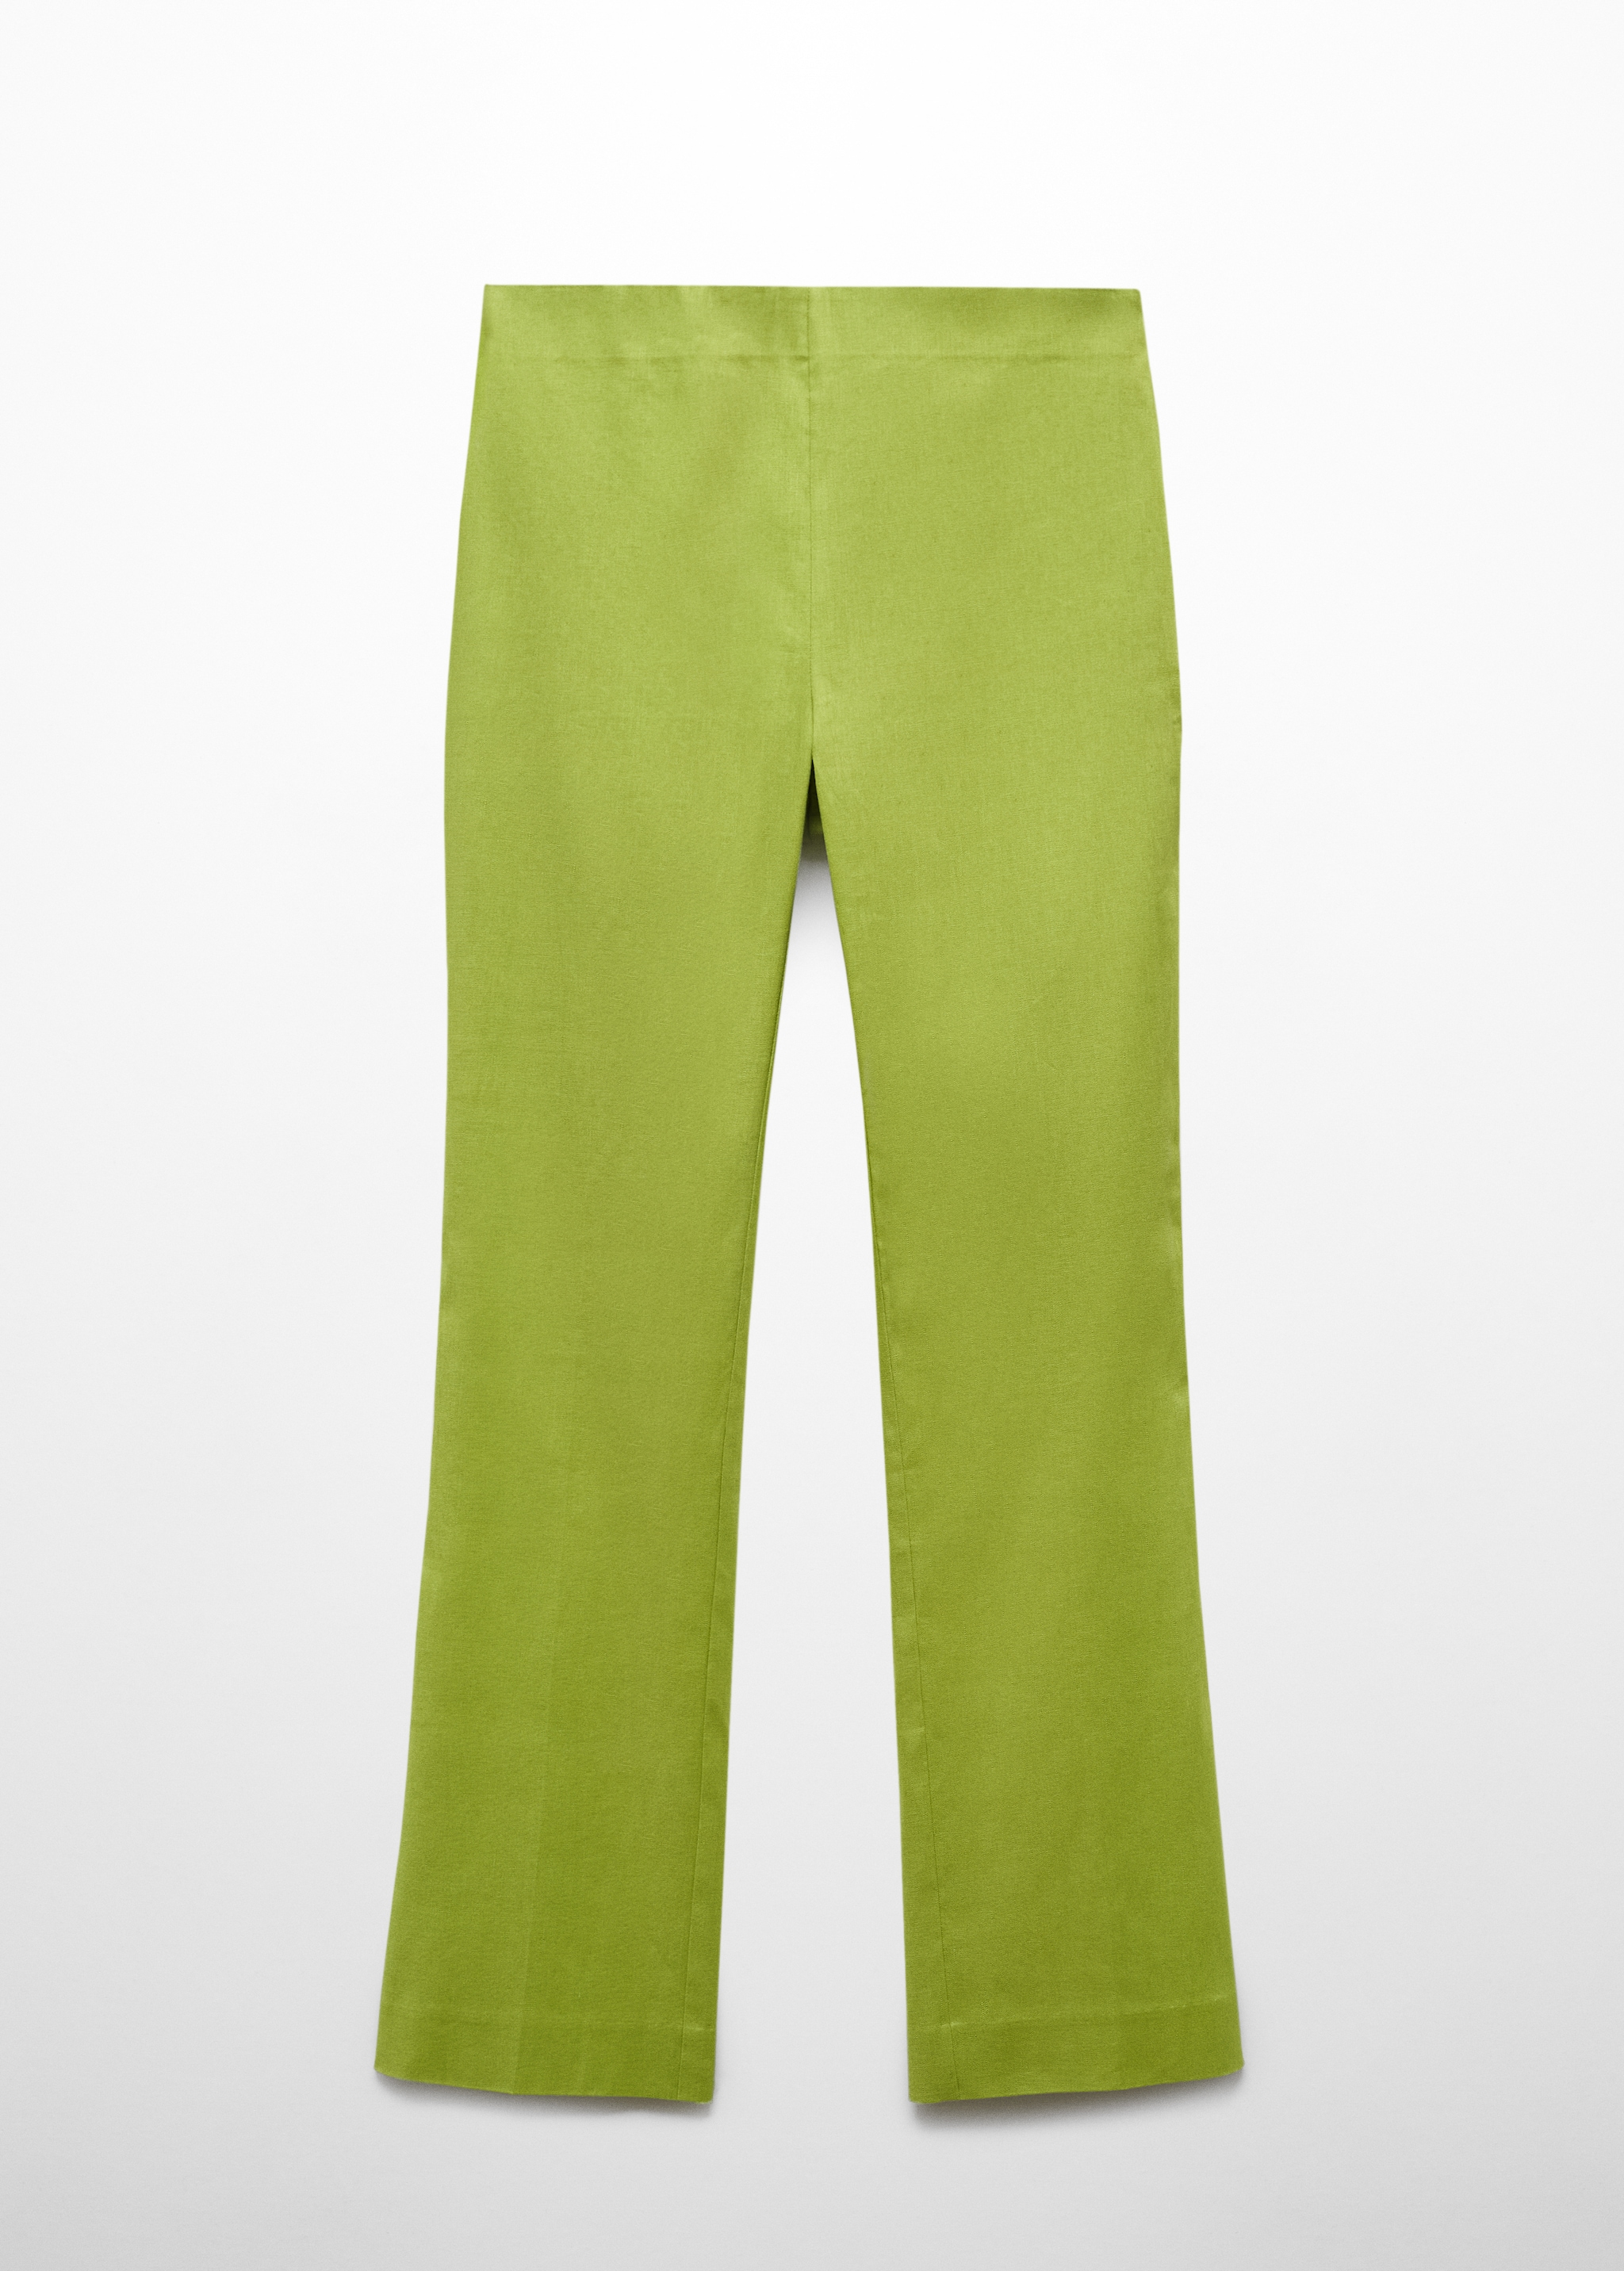 Linen flare trousers - Article without model